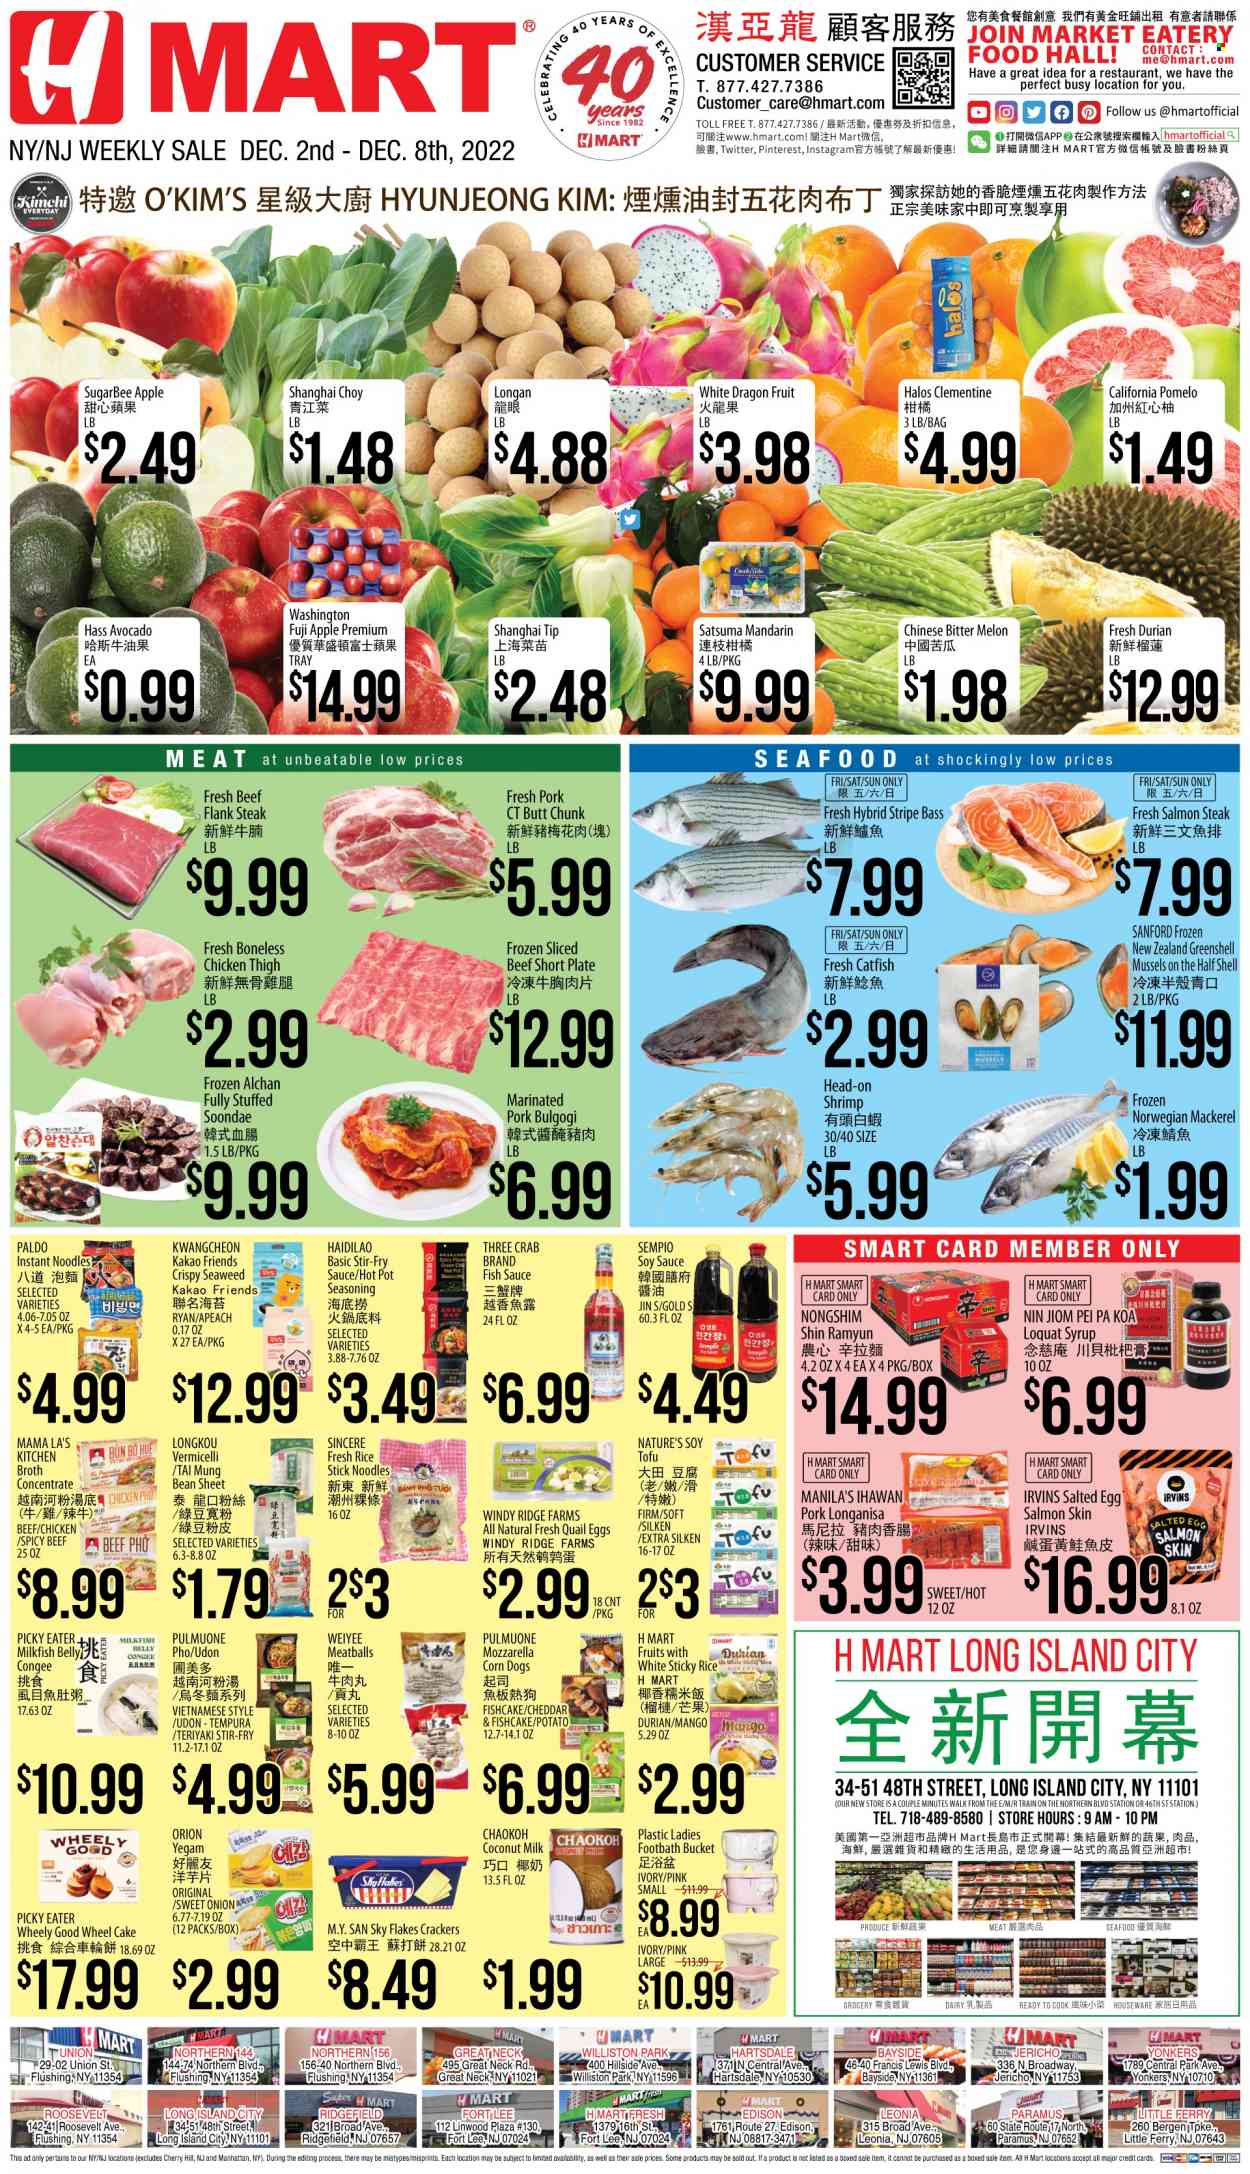 thumbnail - Hmart Flyer - 12/02/2022 - 12/08/2022 - Sales products - cake, onion, avocado, mandarines, mango, Fuji apple, pomelo, dragon fruit, catfish, mackerel, mussels, salmon, seafood, crab, fish, shrimps, milkfish, meatballs, instant noodles, sauce, noodles, cheddar, cheese, tofu, fish cake, crackers, salted egg, seaweed, broth, coconut milk, spice, fish sauce, soy sauce, syrup, quail, beef meat, steak, flank steak, pork meat, marinated pork, houseware, tray, plate, pot, melons. Page 1.